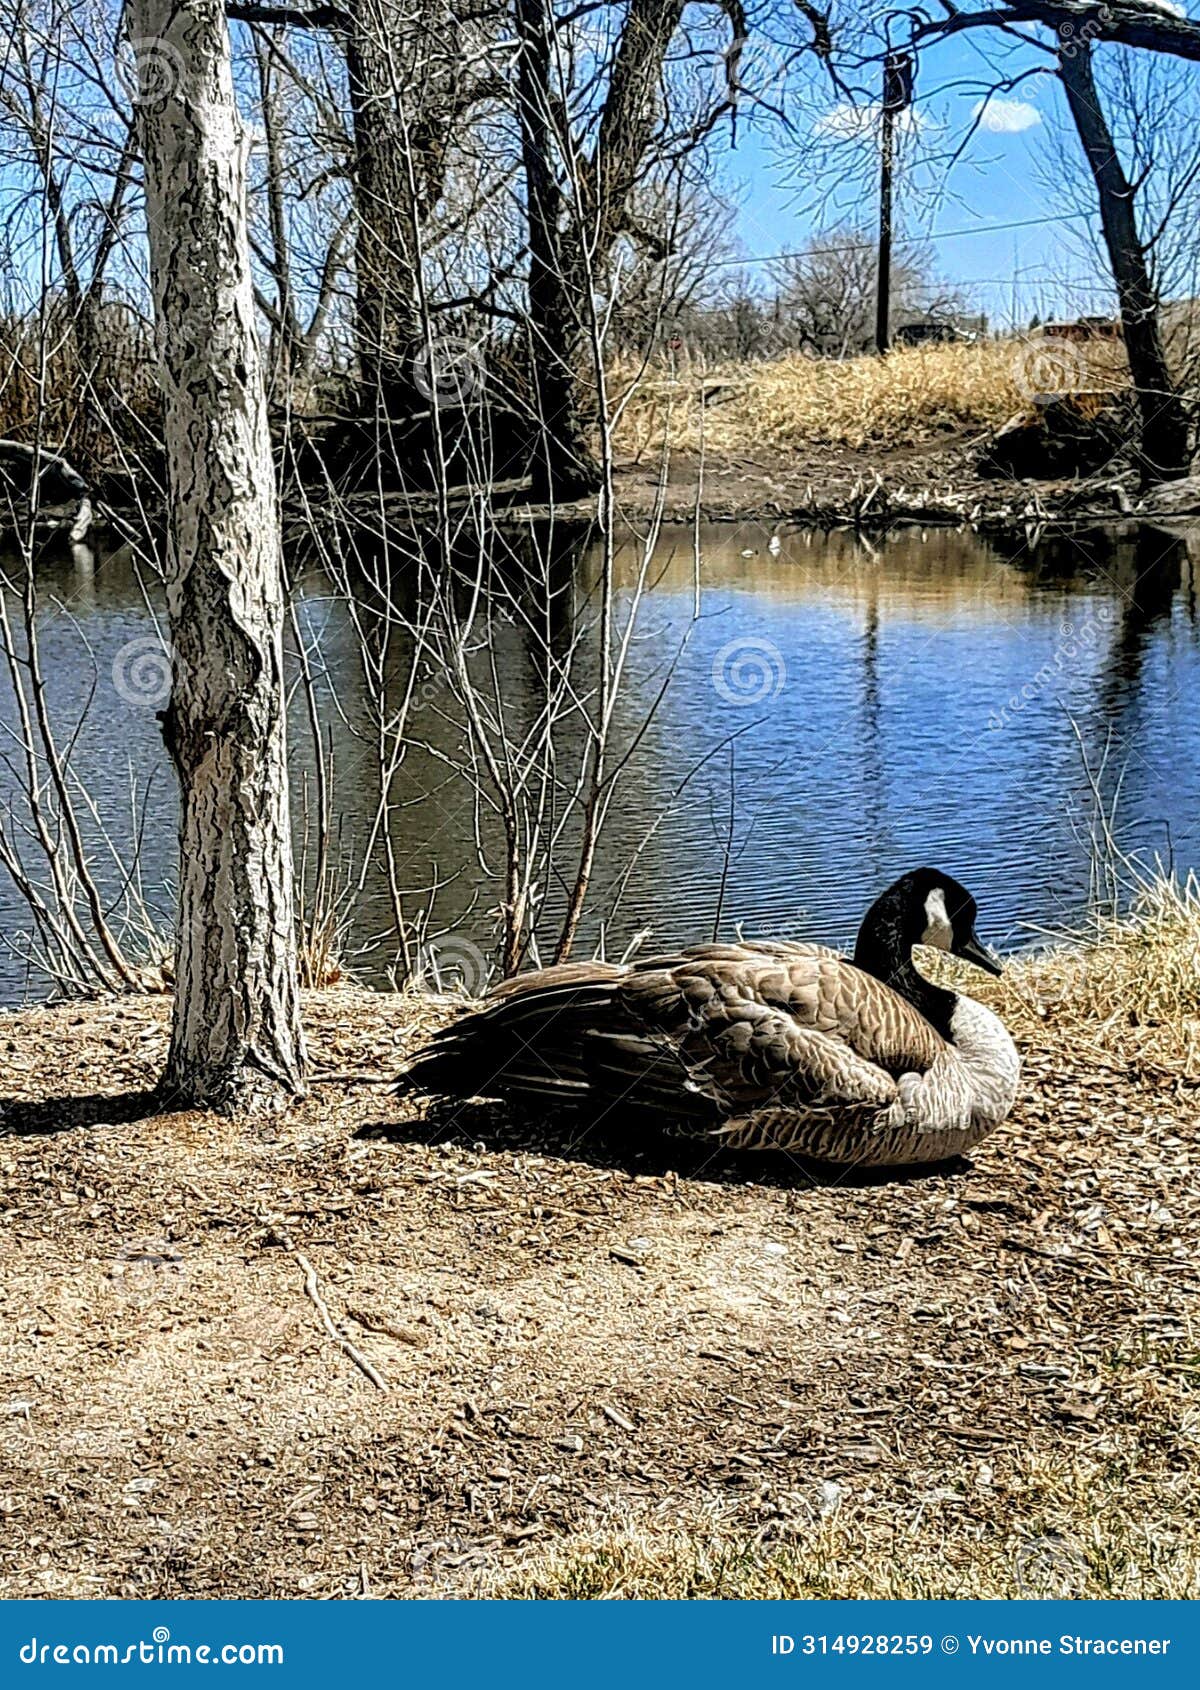 fluffy goose relaxing in the sun at mylar park , cheyenne, wyoming.